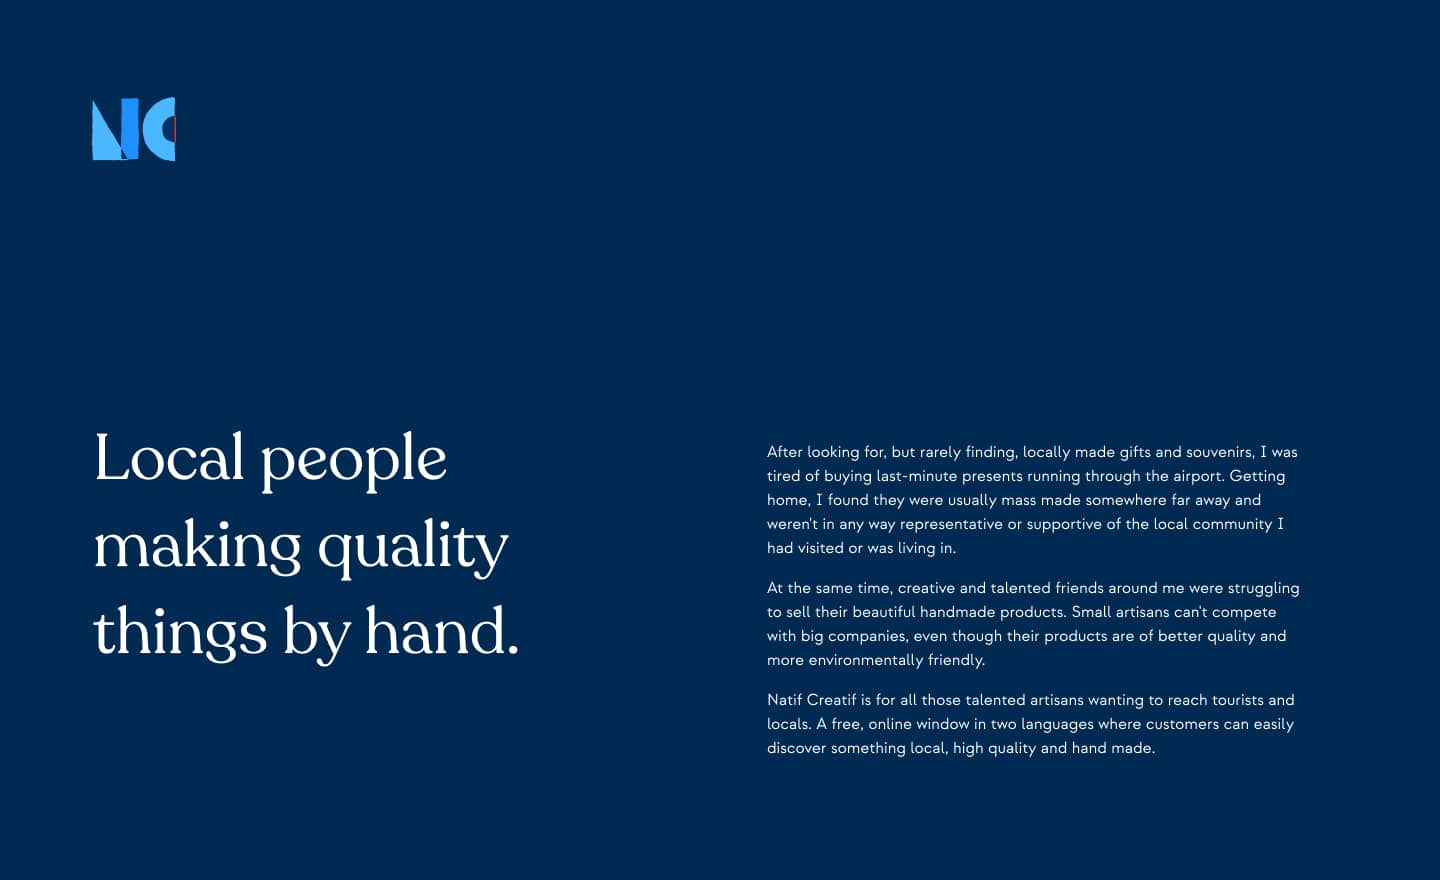 A sample intro page from the NC brand guidelines, showing the headline 'Local people making quality things by hand' and a message from Natasha, the founder. The message is too small to be legible.